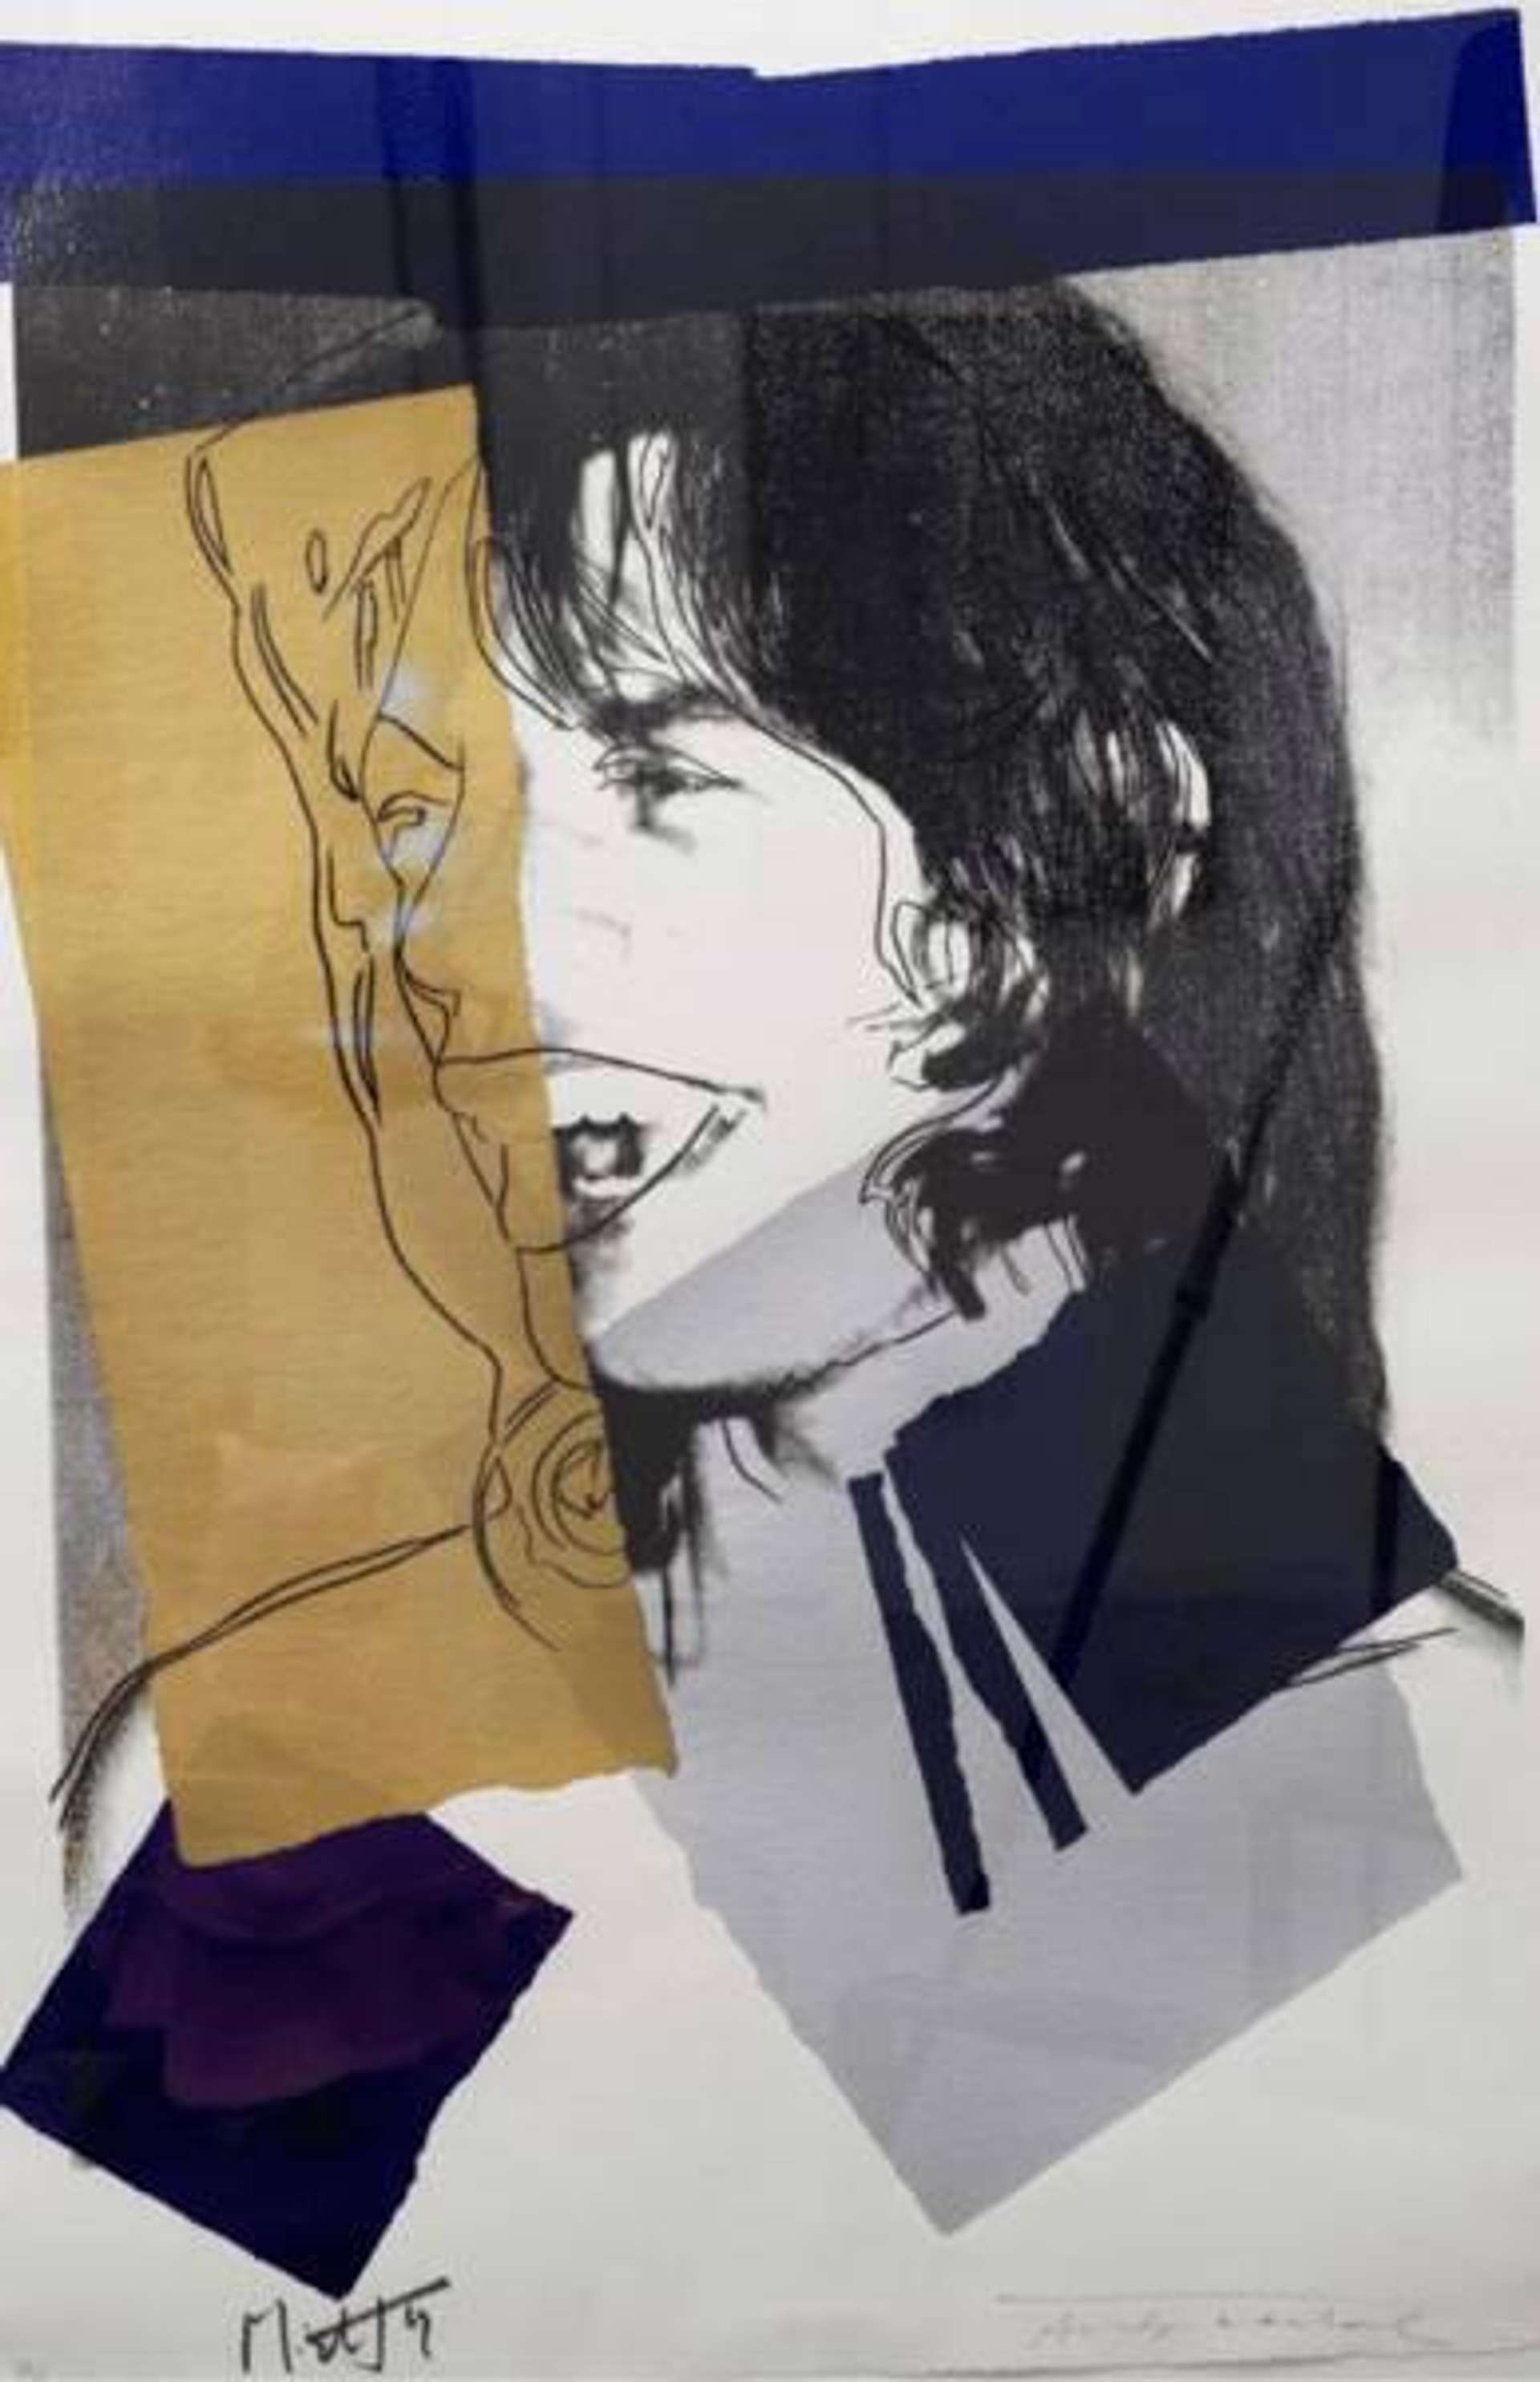 Mick Jagger (F. & S. II.142) depicts Mick Jagger, lead singer of the Rolling Stones, in profile. For this screen print in an edition of 250, Warhol has drawn over Jagger’s hair, nose, and lips, drawing attention to these details. Jagger’s famous lips occupy the center of the composition.